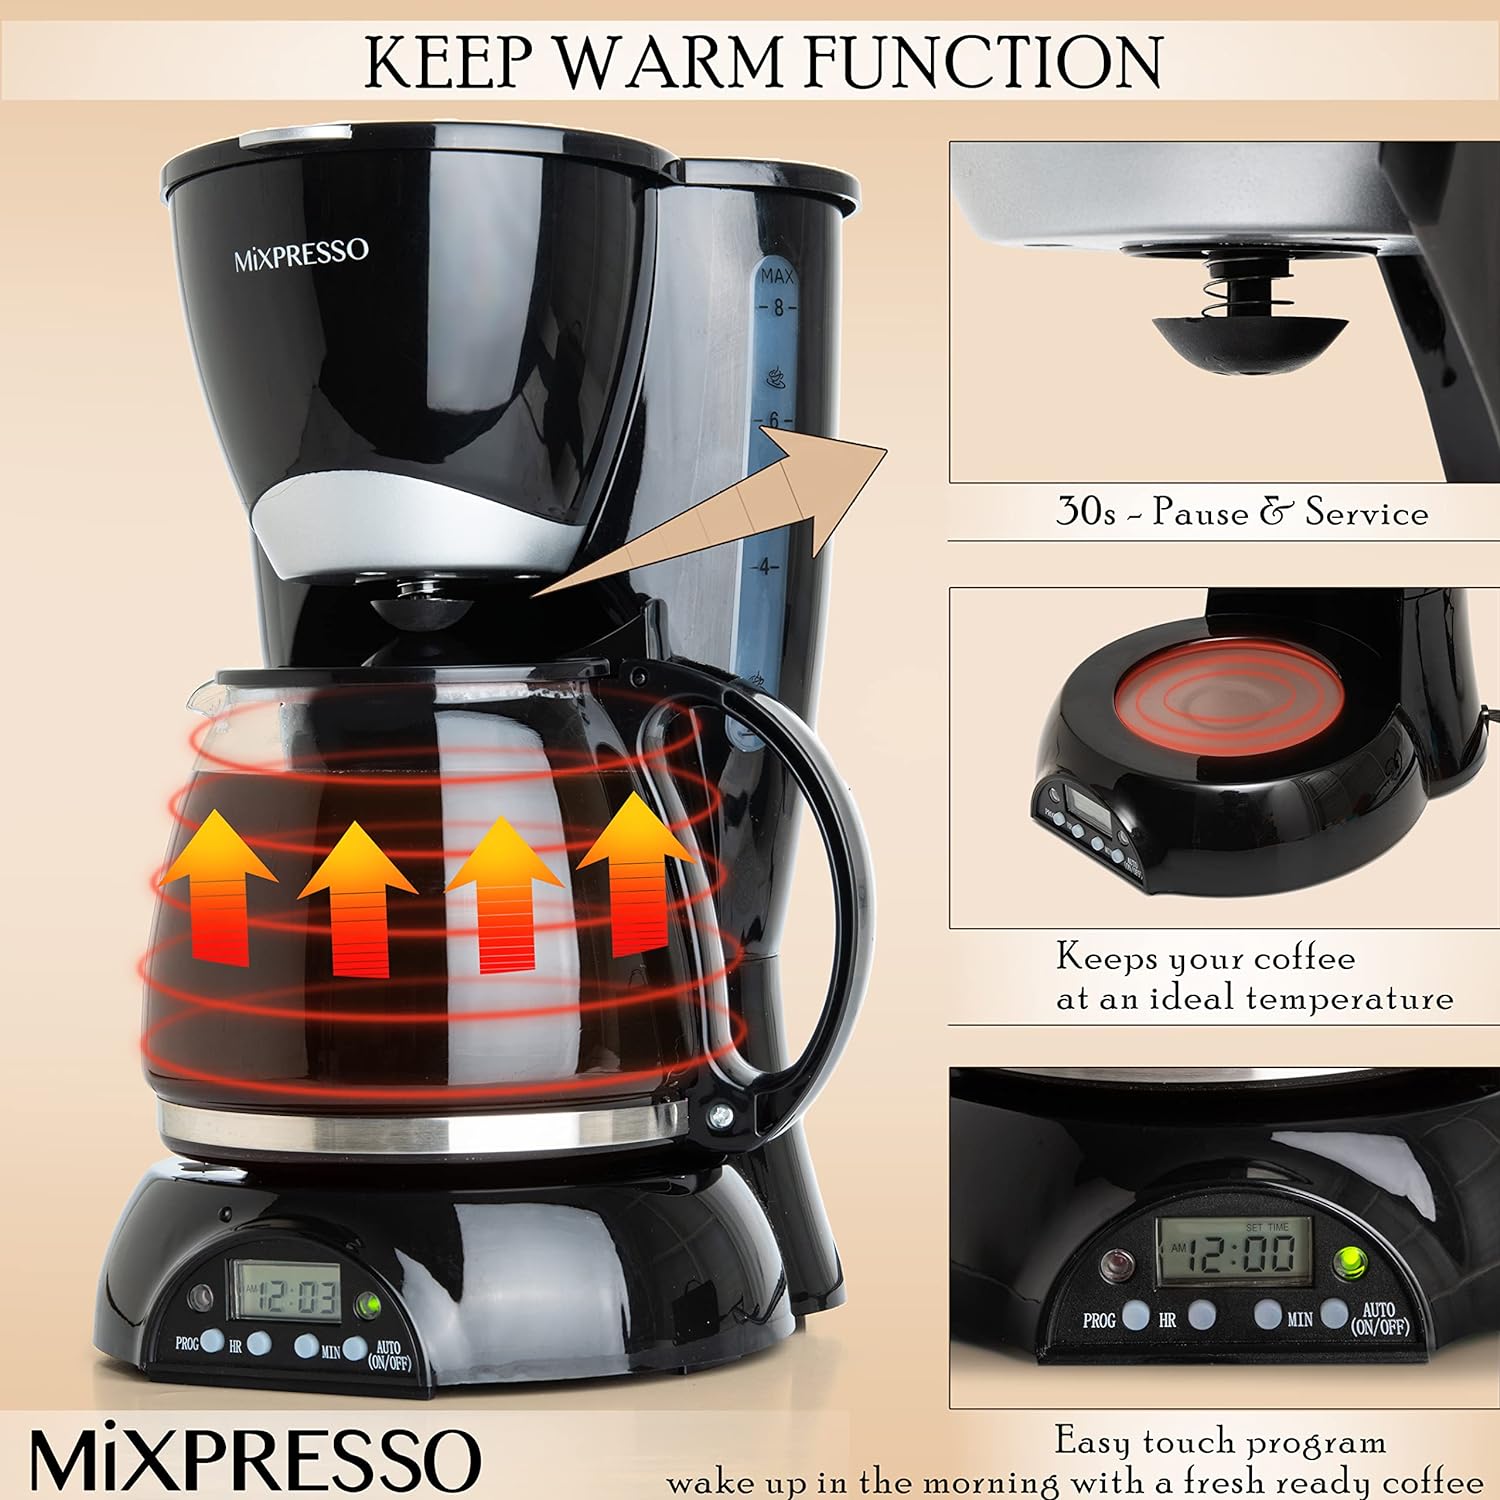 GCP Products GCP-US-565947 8-Cup Drip Coffee Maker Programmable